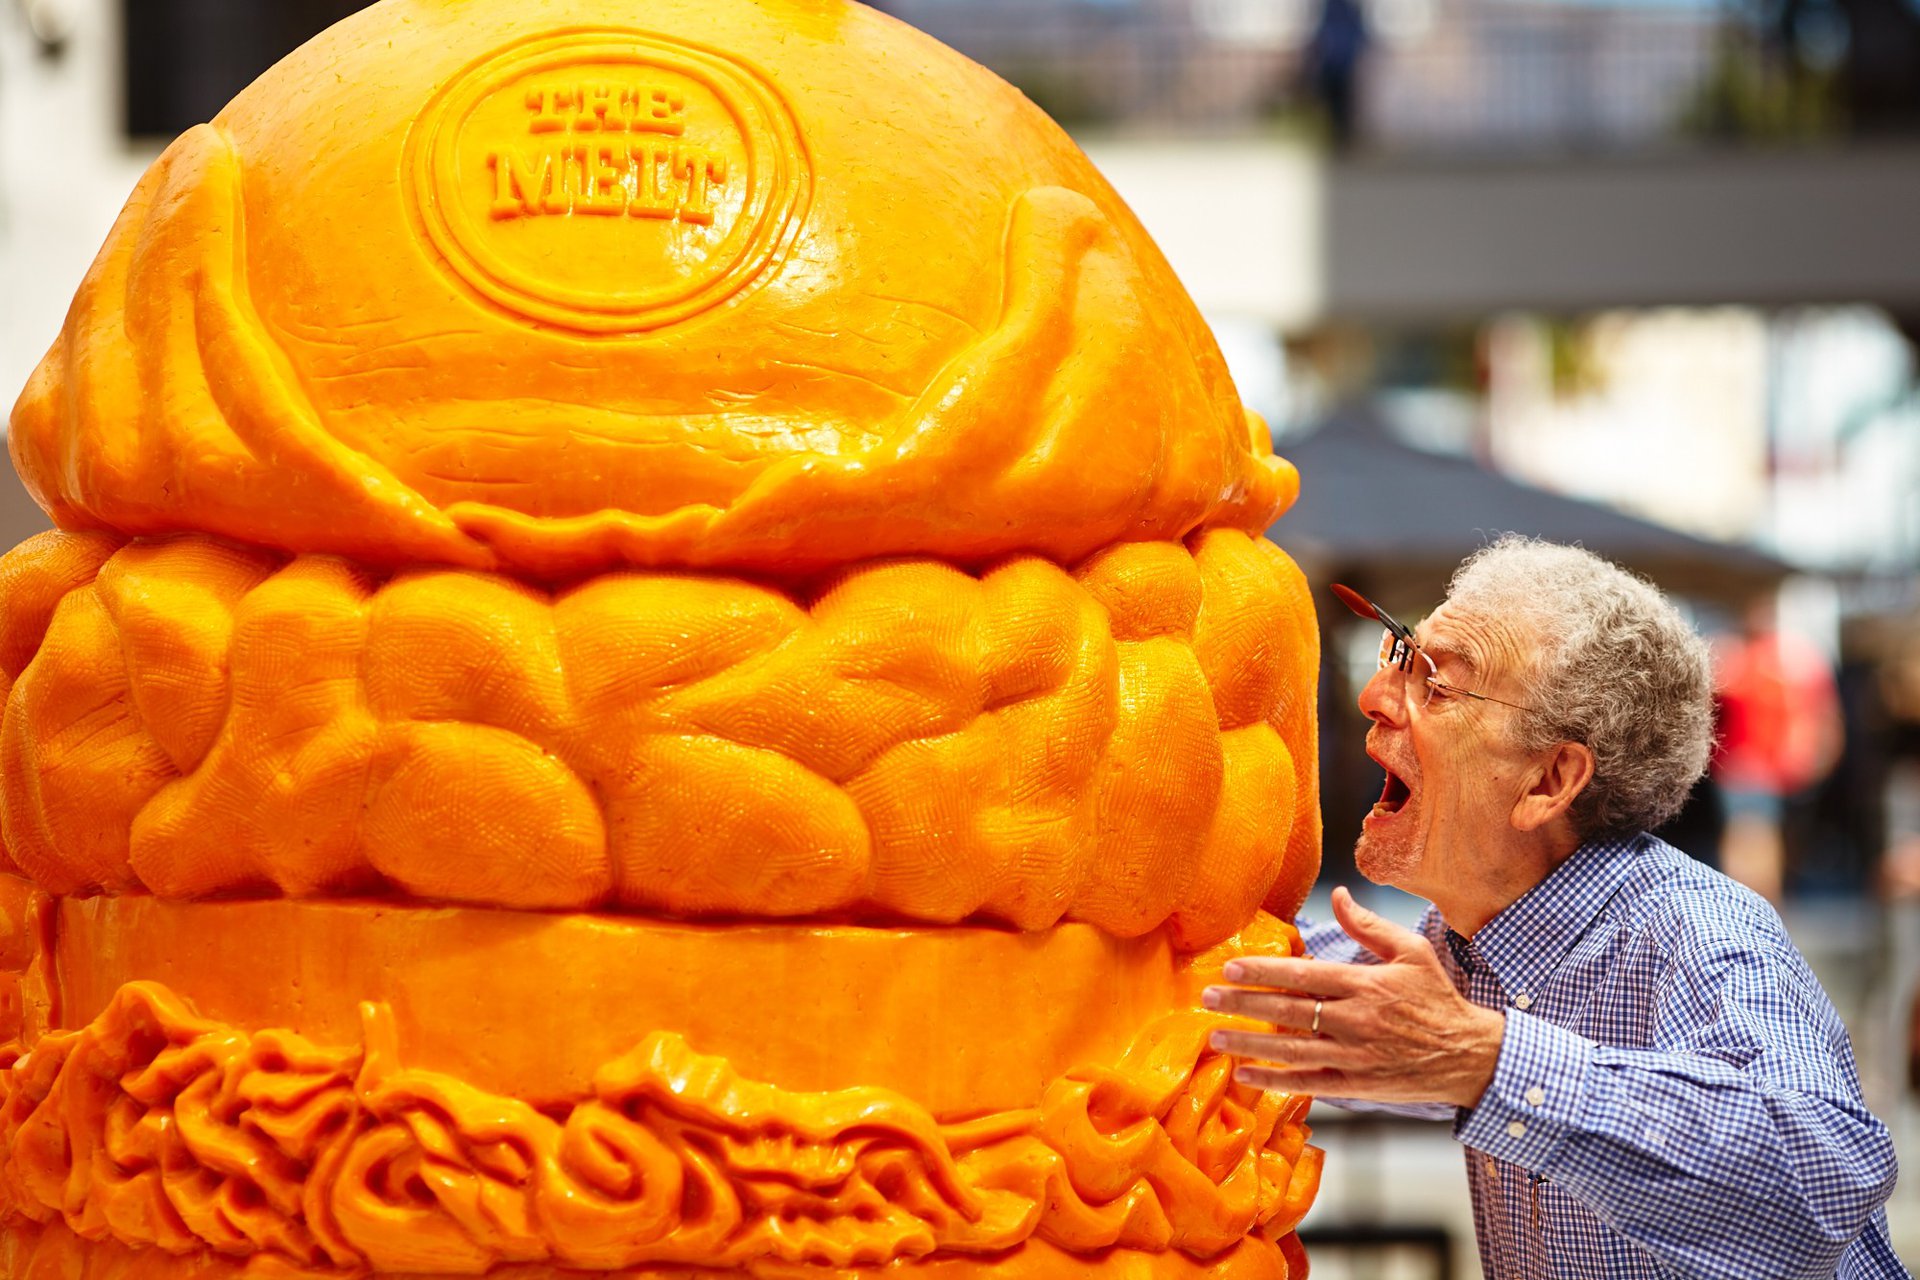 To celebrate National Cheeseburger Day and the anniversary of The Melt cheeseburger, BeCore broke the Guinness Record for the world’s largest cheese carving.